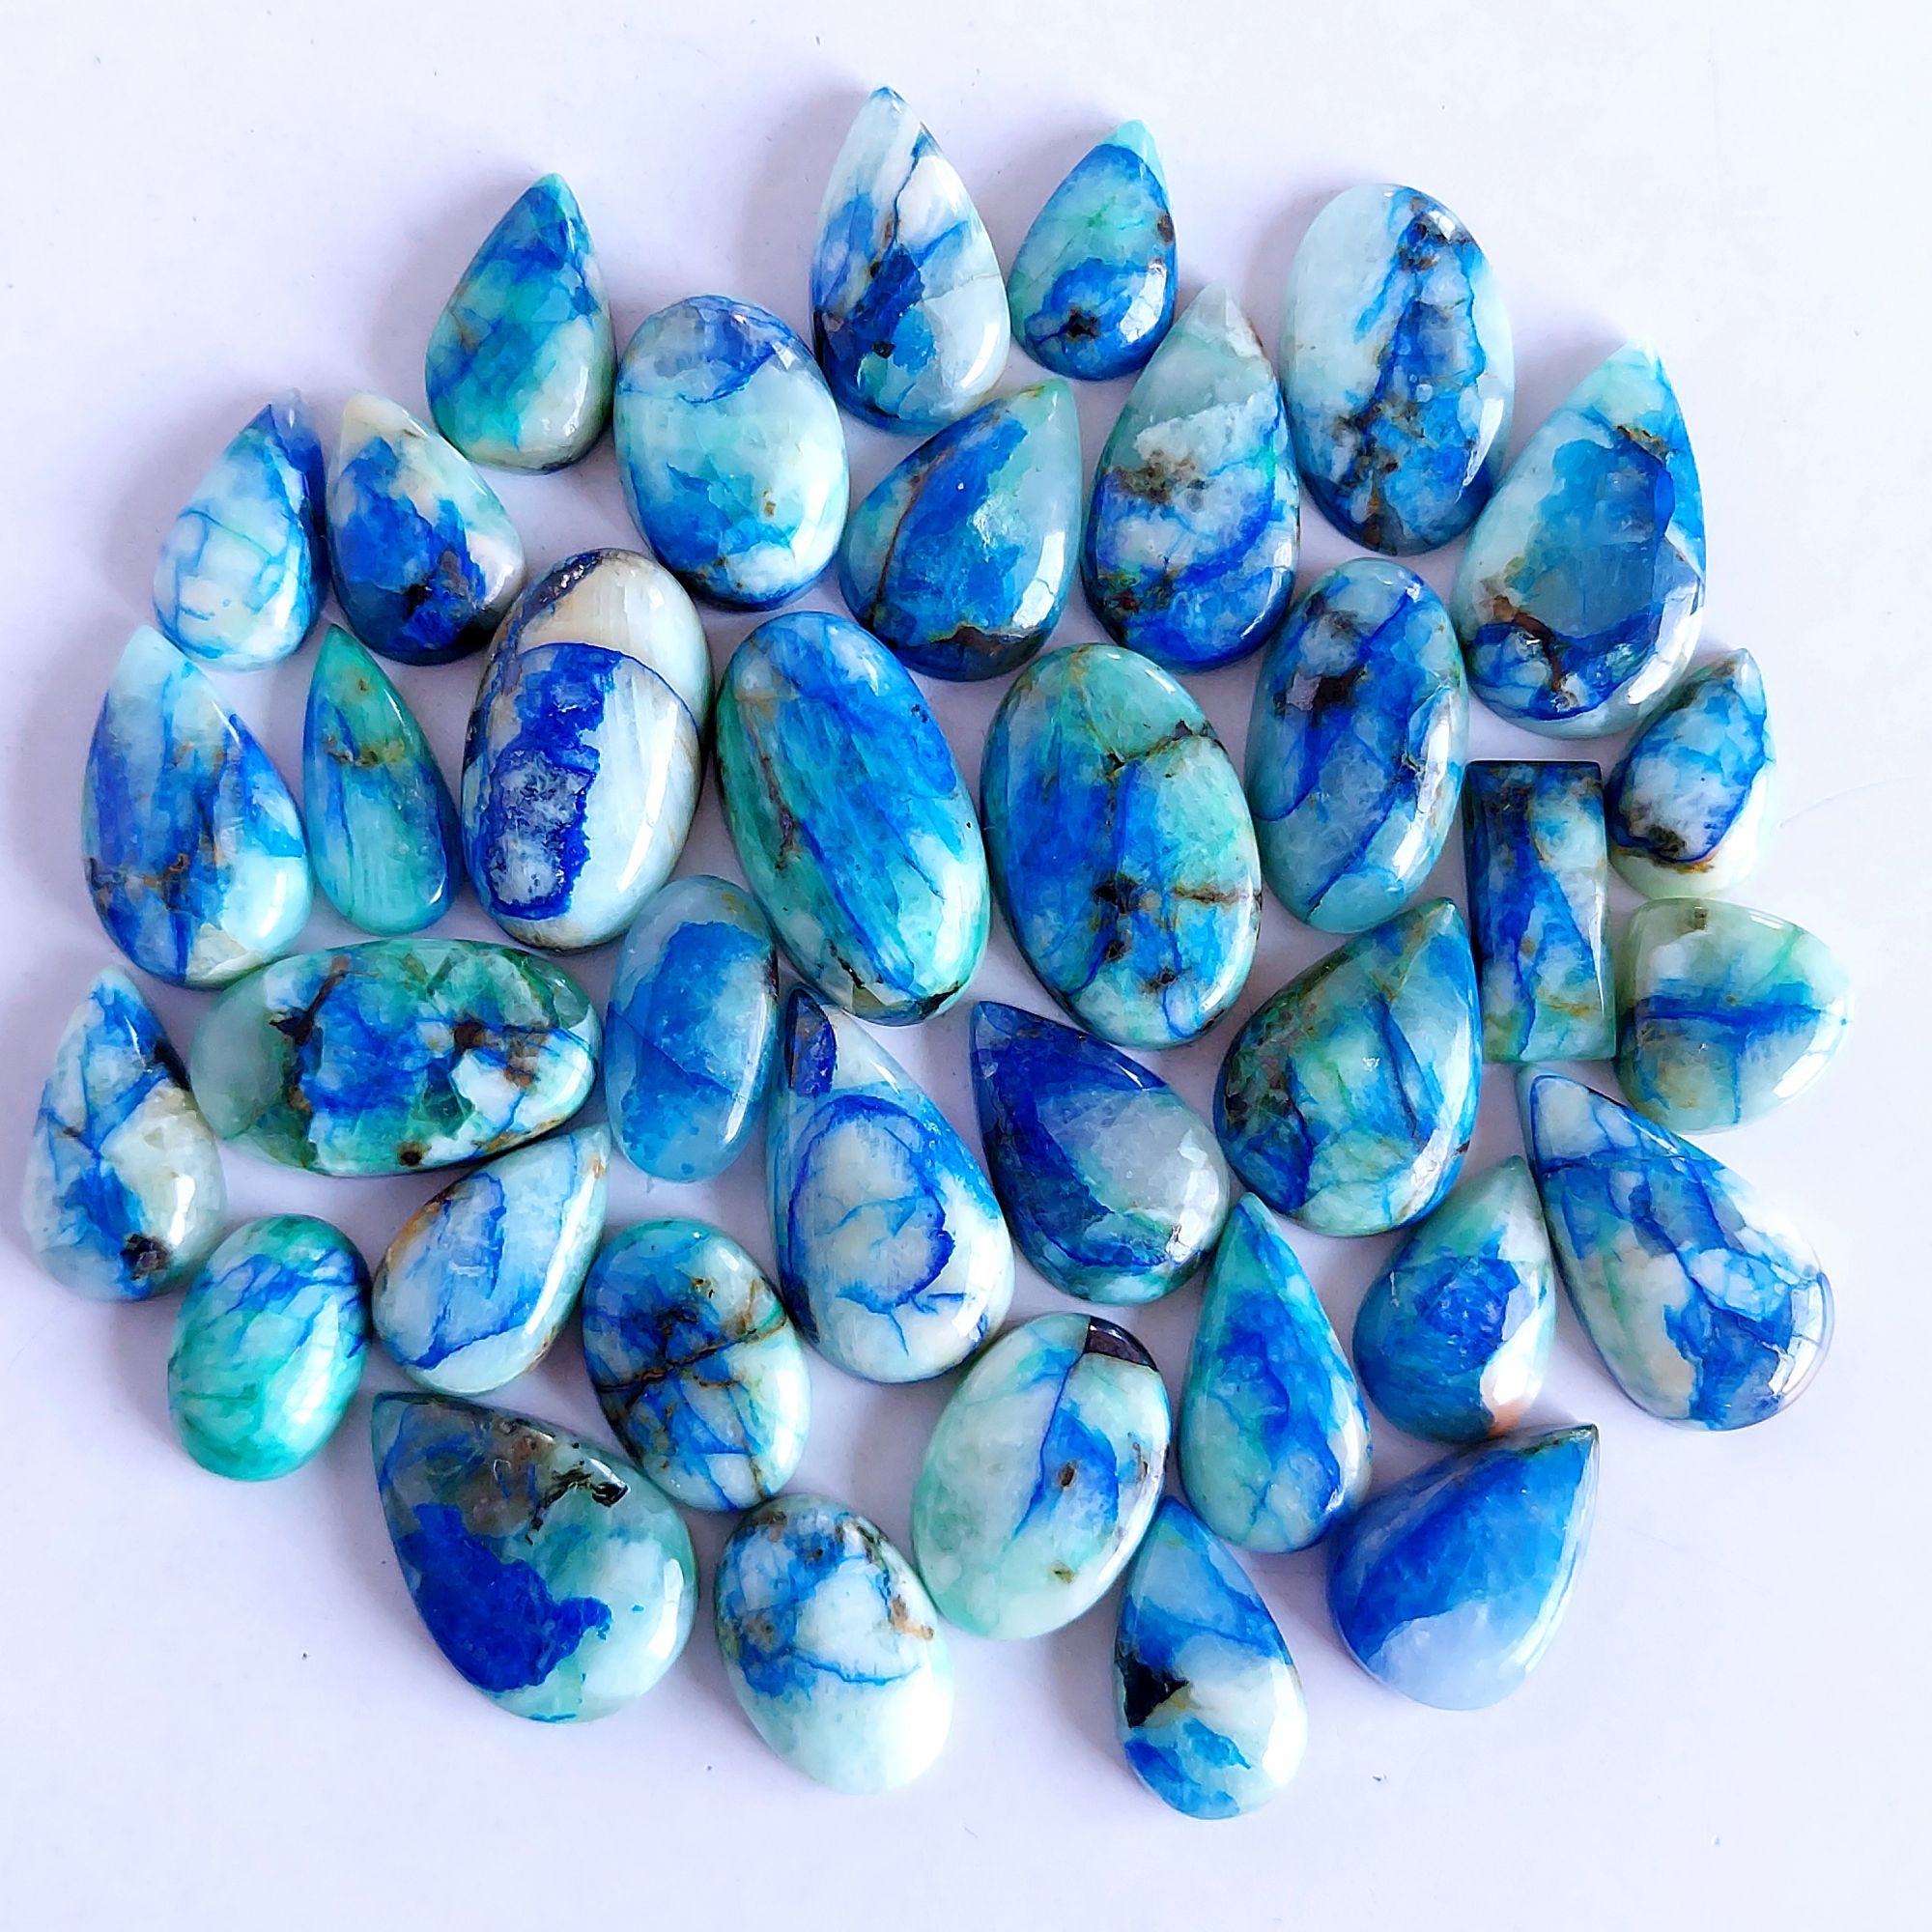 398.Cts 36 Pcs Natural Smooth Azurite Mix Loose Gemstone Cabochon Lot Size 25x14 17x10mm Wholesale Gemstone For jewelry